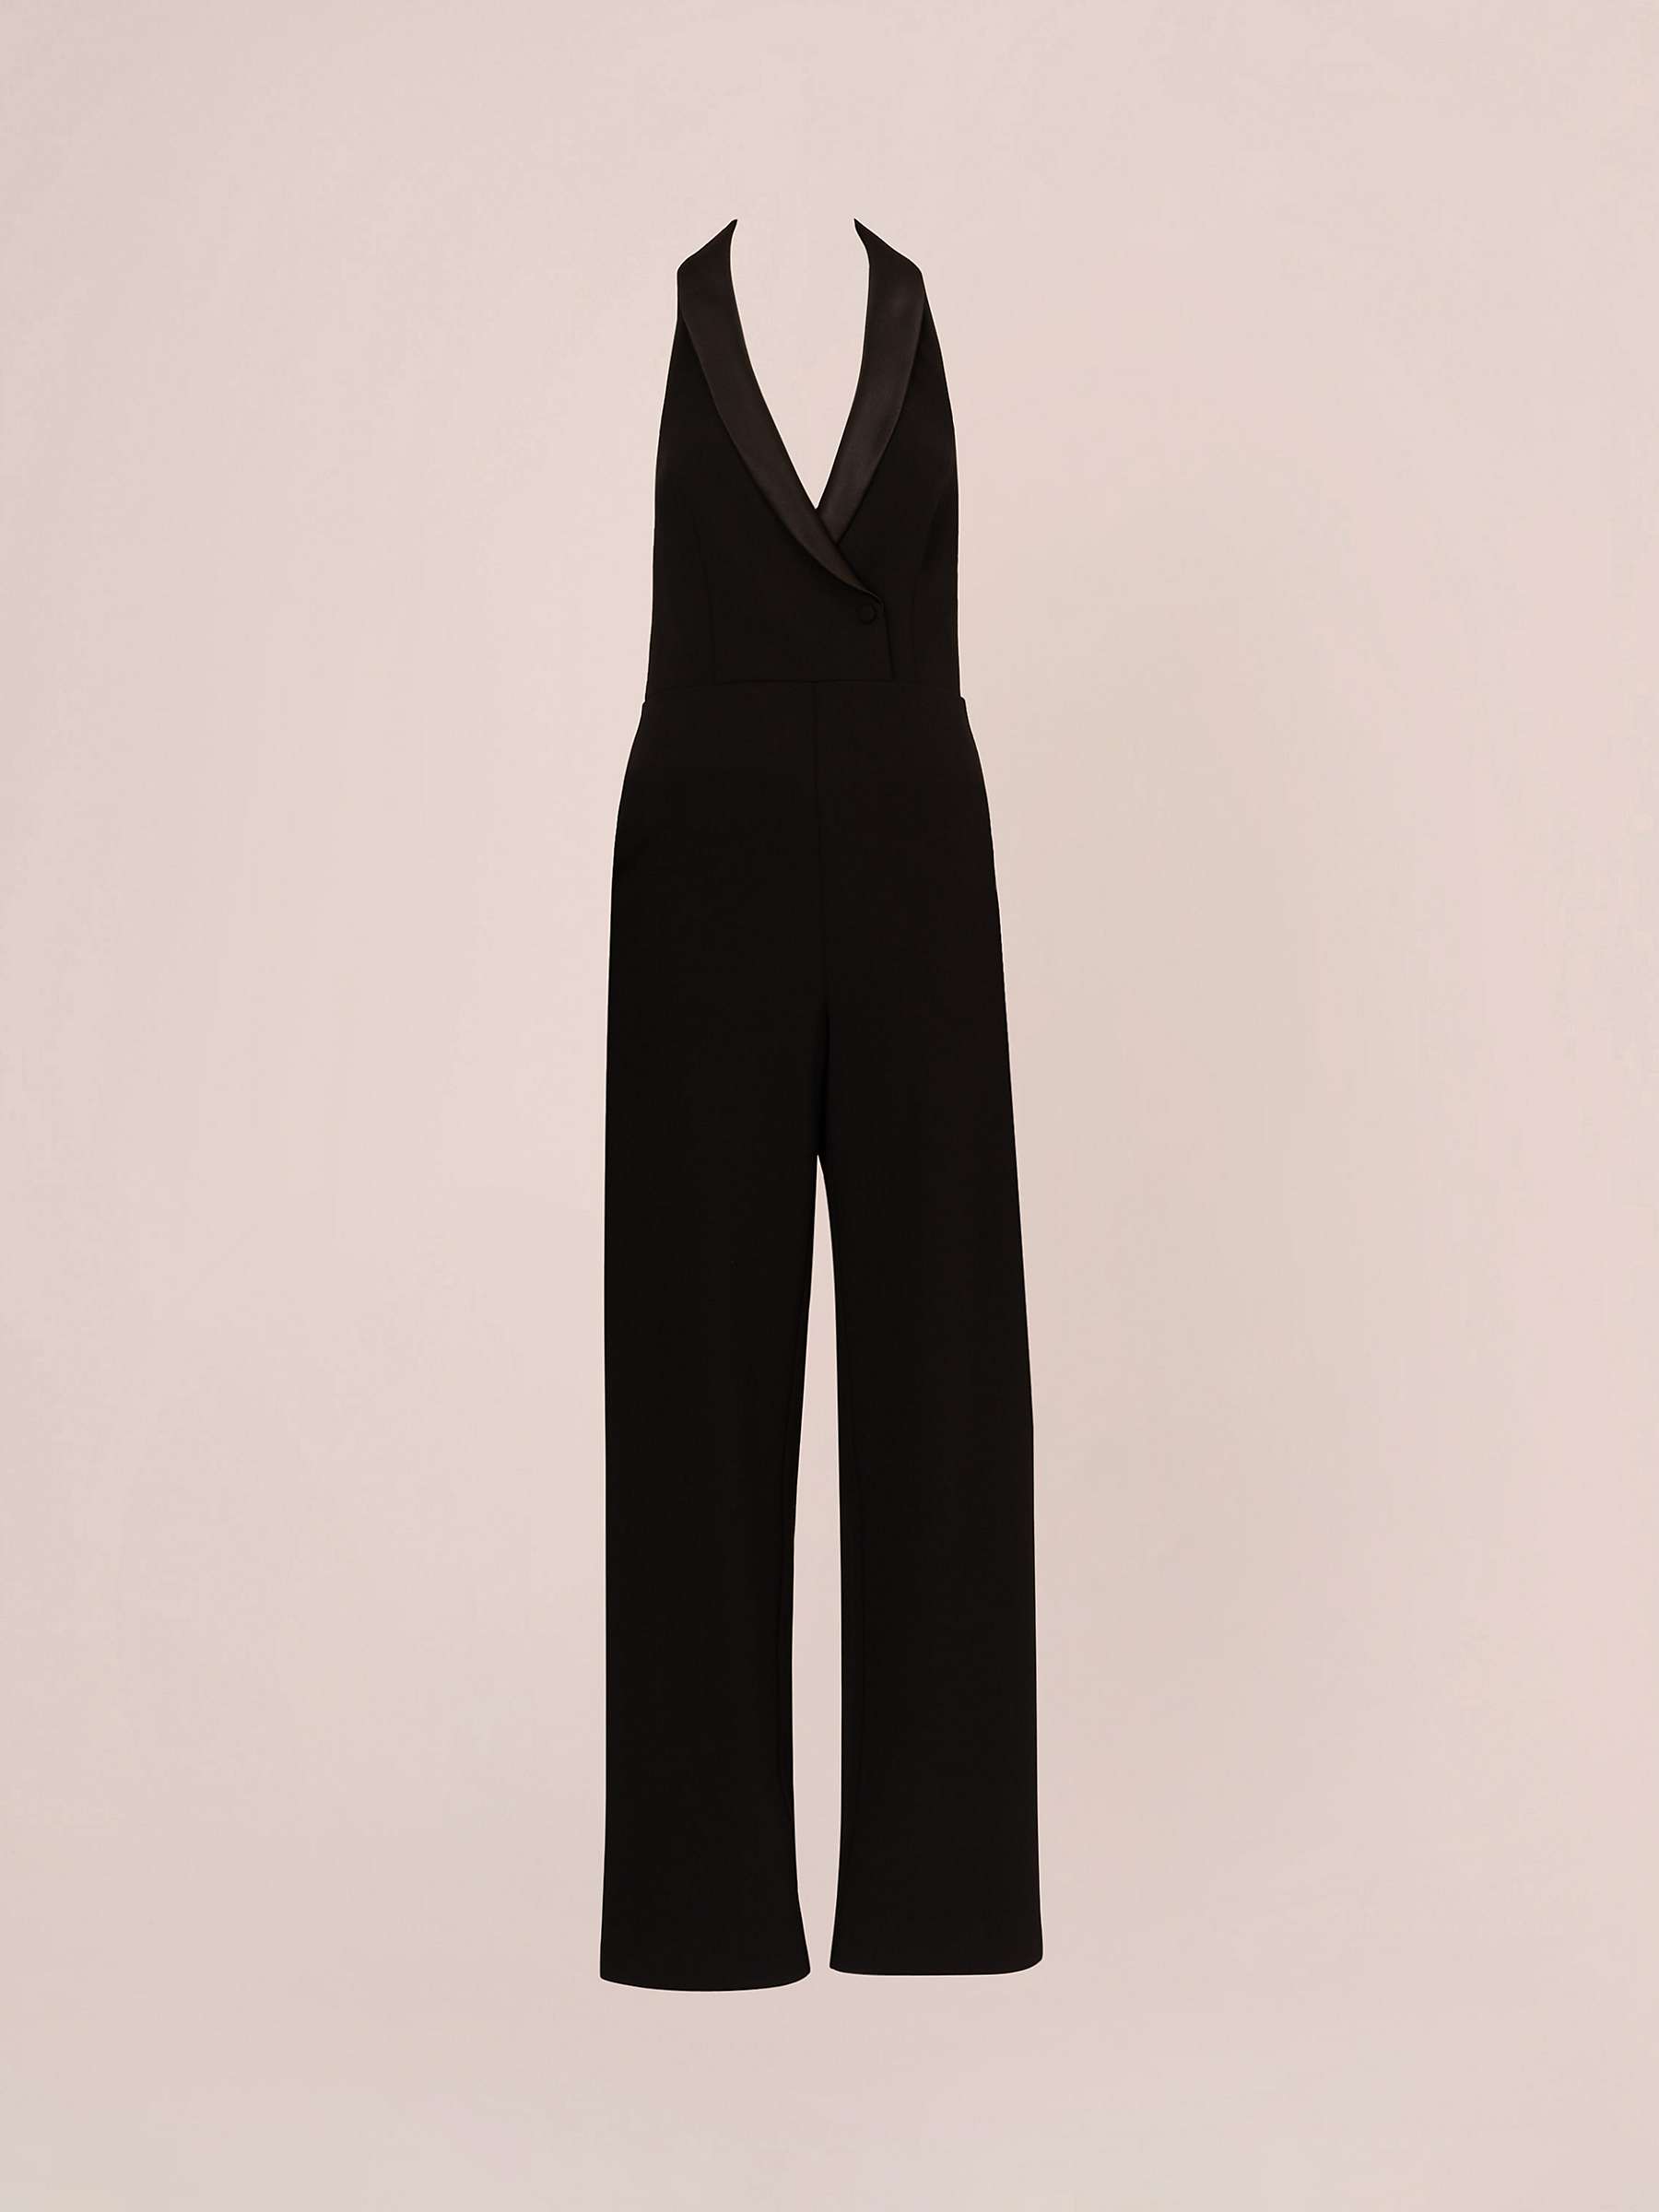 Buy Aidan by Adrianna Papell Tuxedo Crepe Jumpsuit, Black Online at johnlewis.com